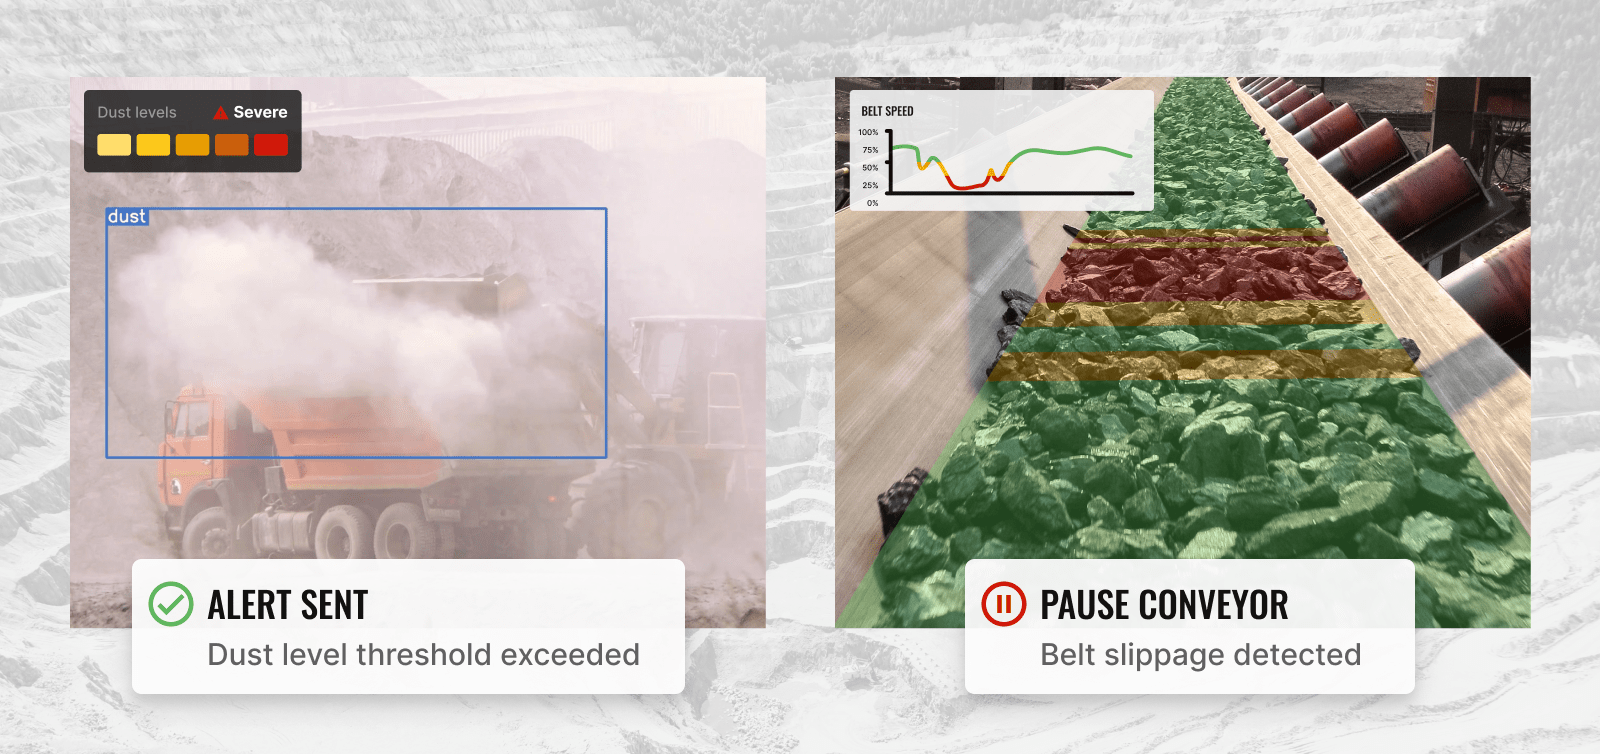 New Dust Detection and Conveyor Belt Slippage AI Apps for the Mining Industry